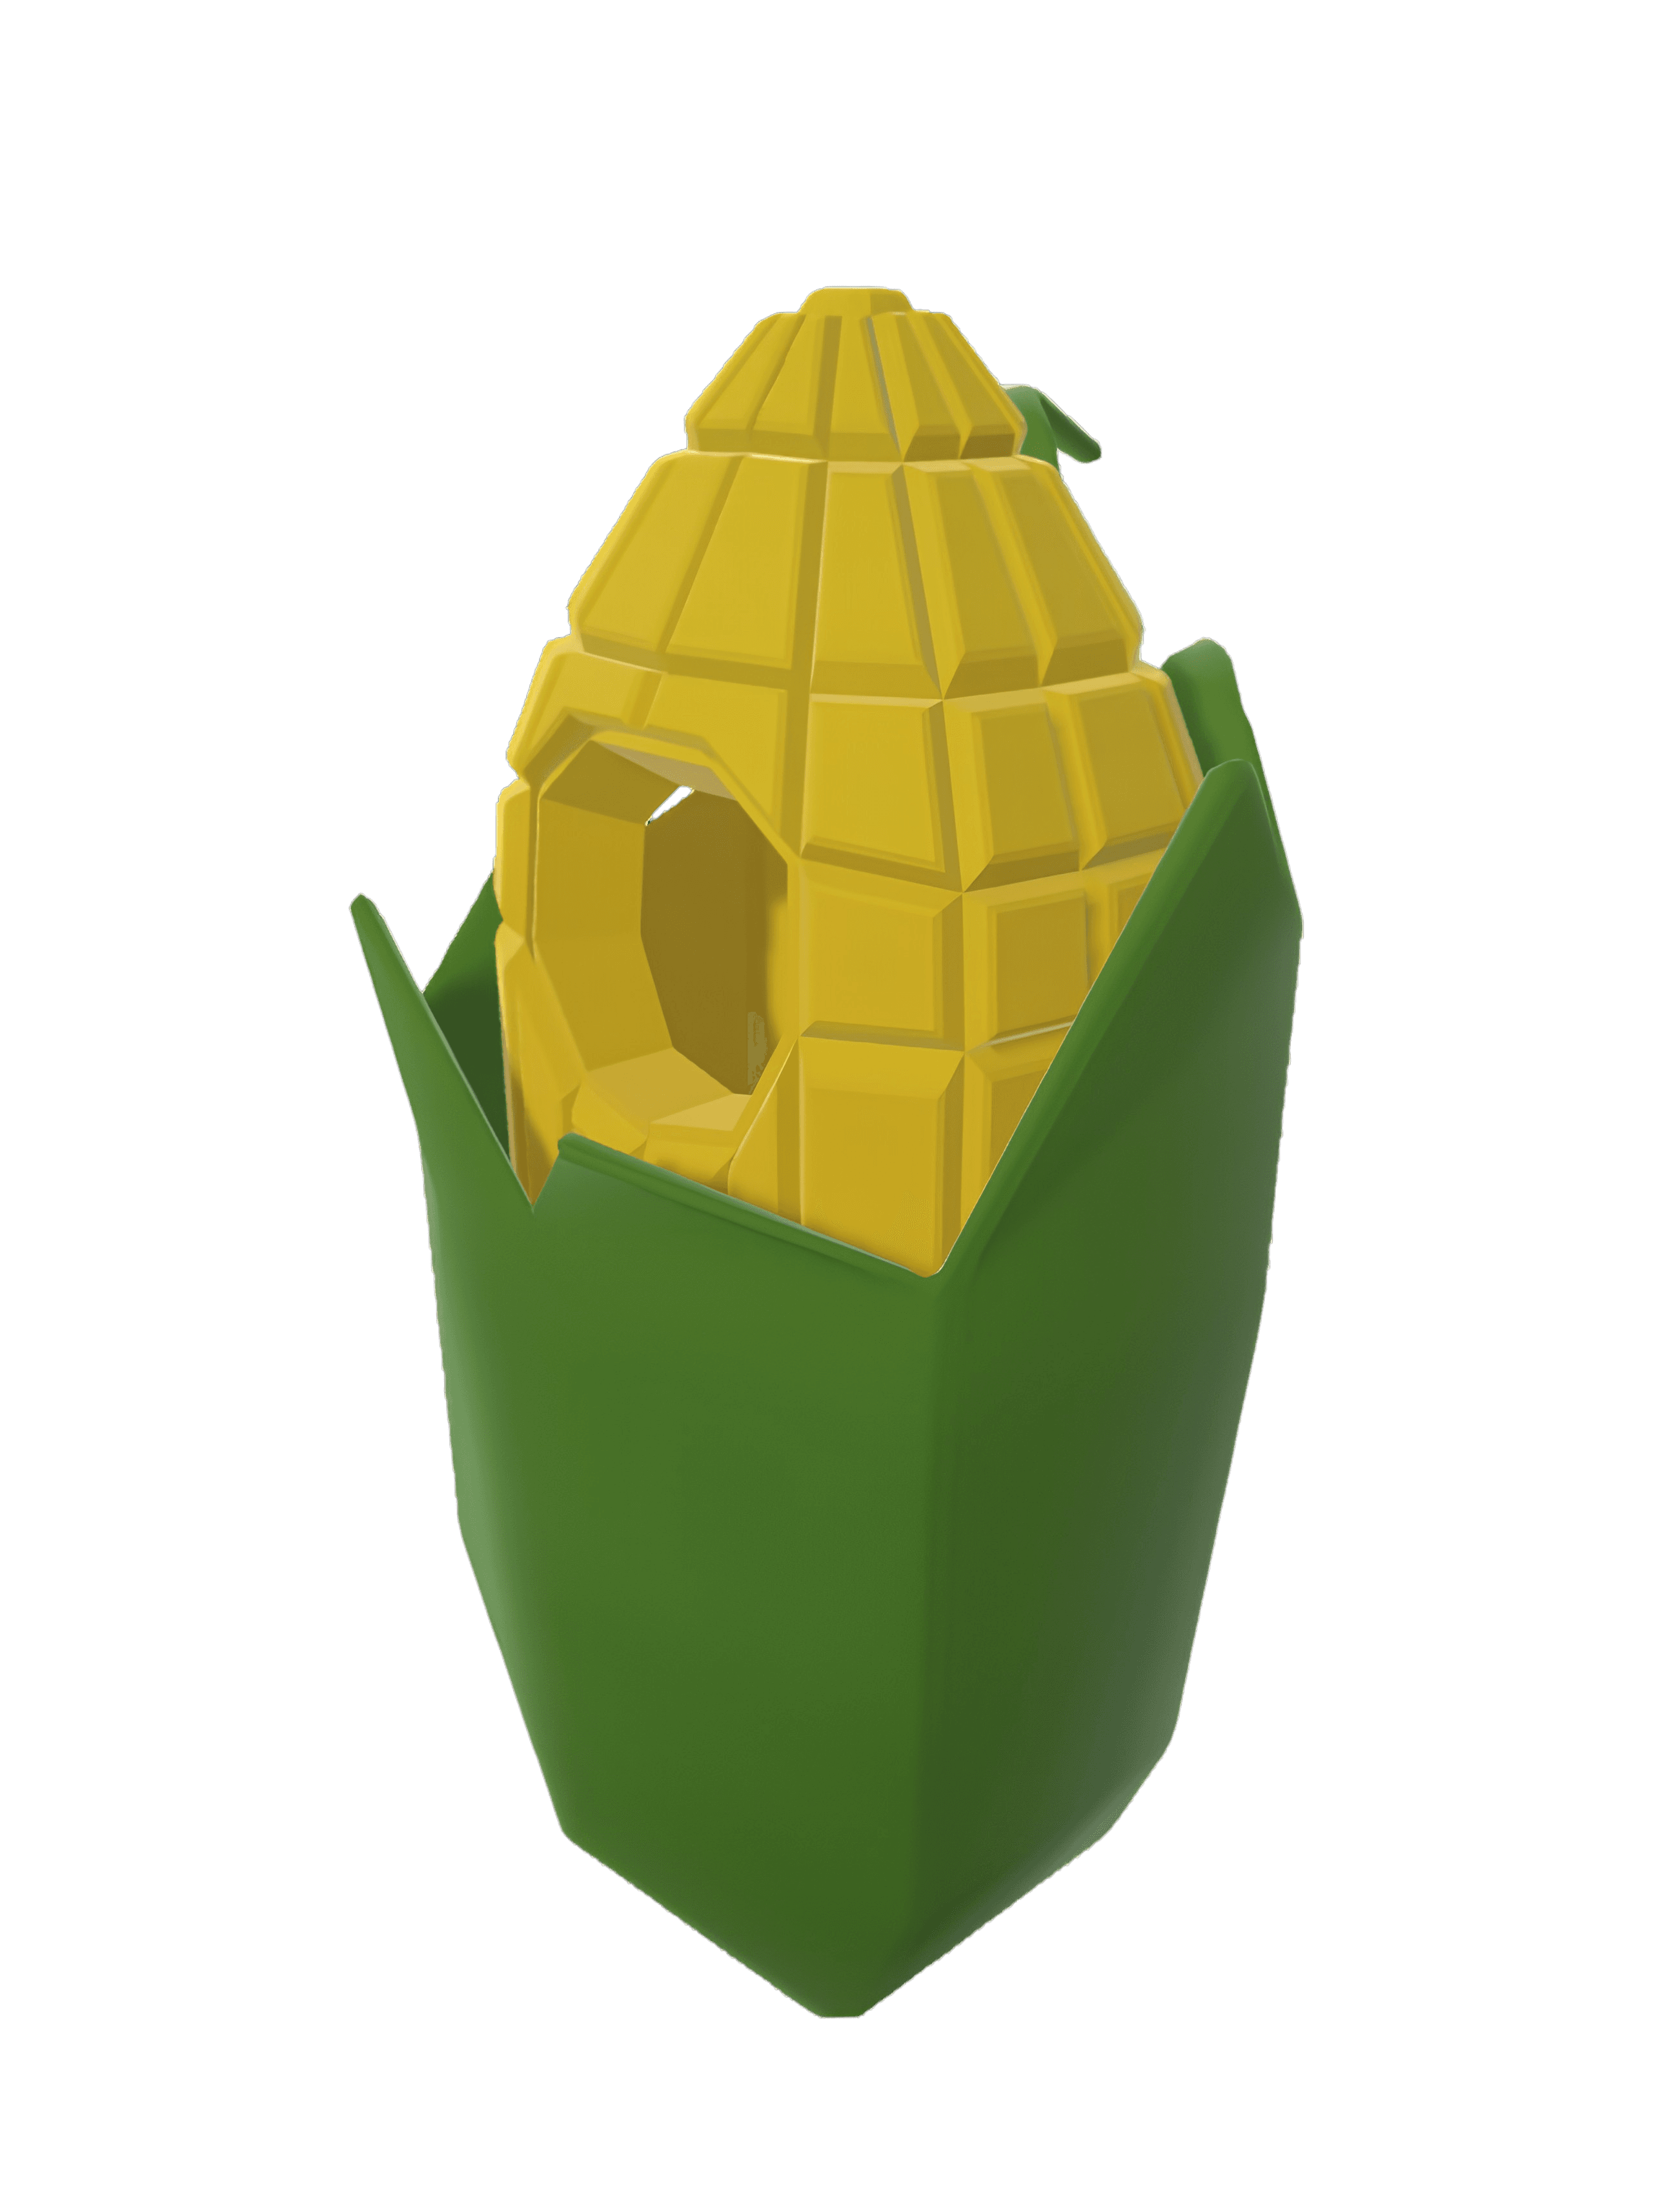 A polygonal corn cob with a hole where a character's face might go.